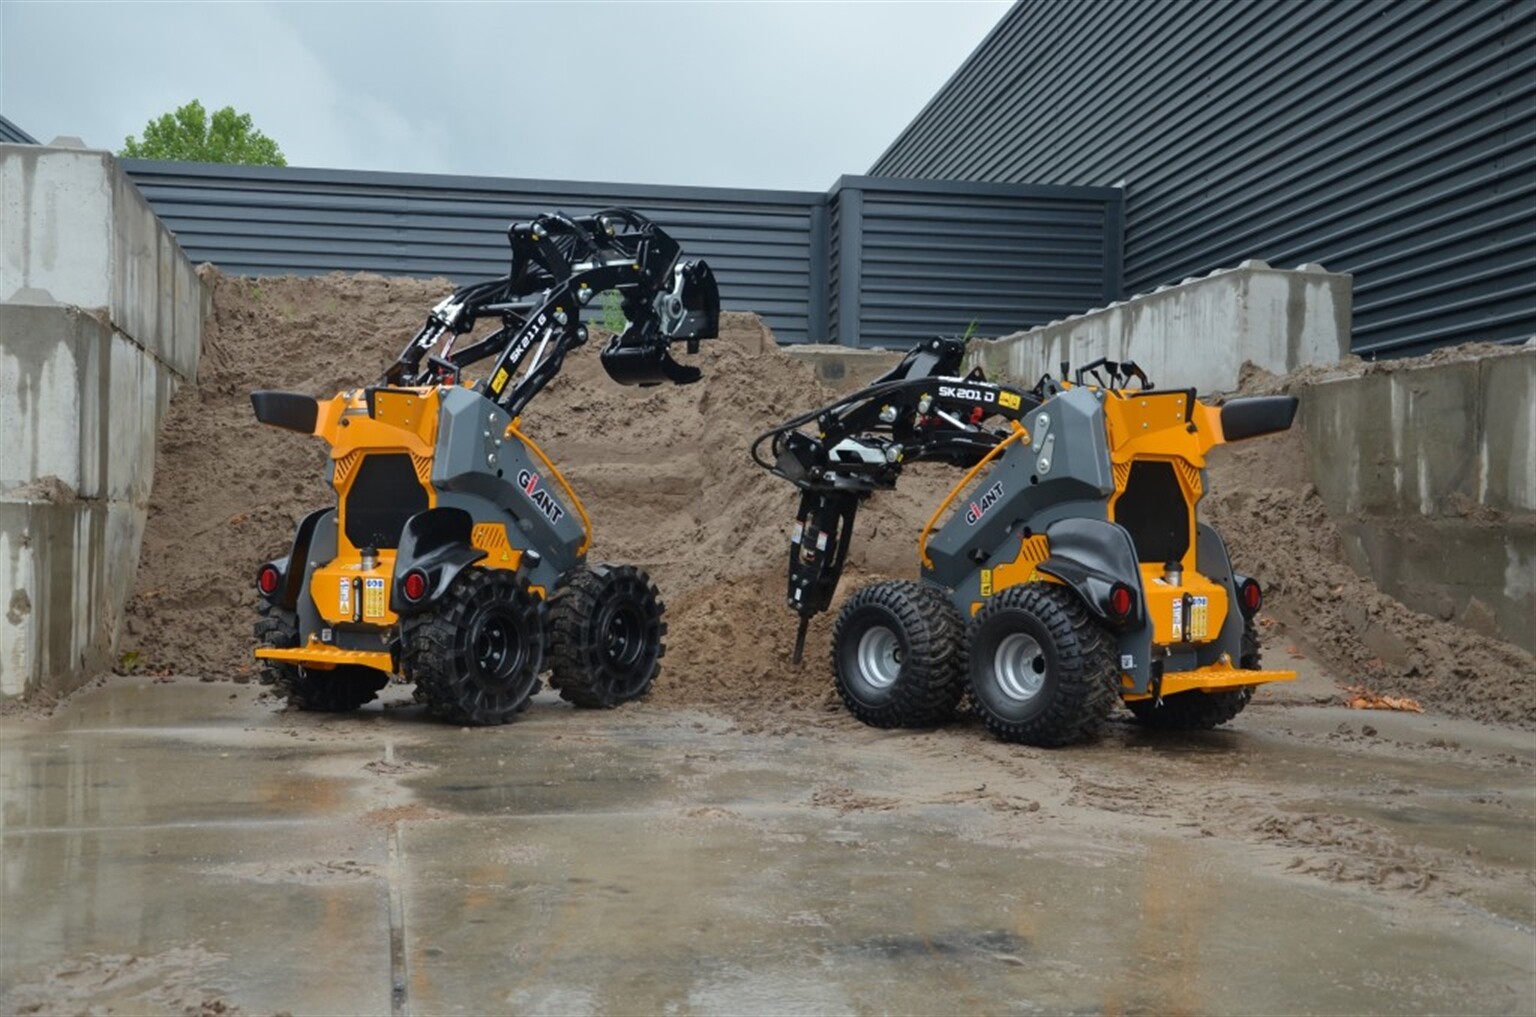 Giant's skid steers go into full production